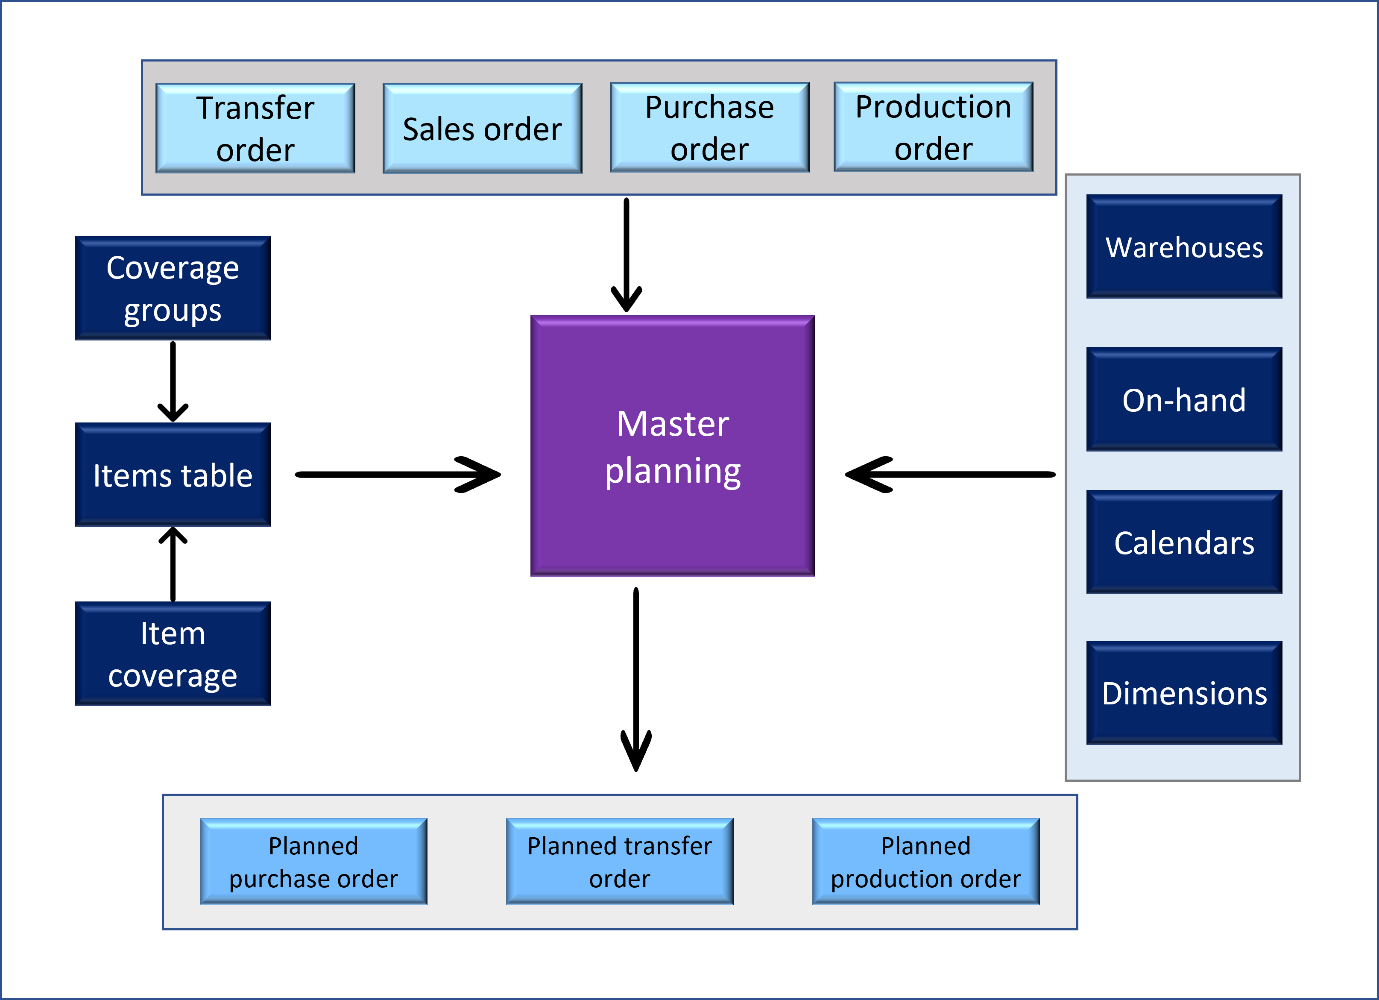 The diagram depicts different input and output components of master planning.